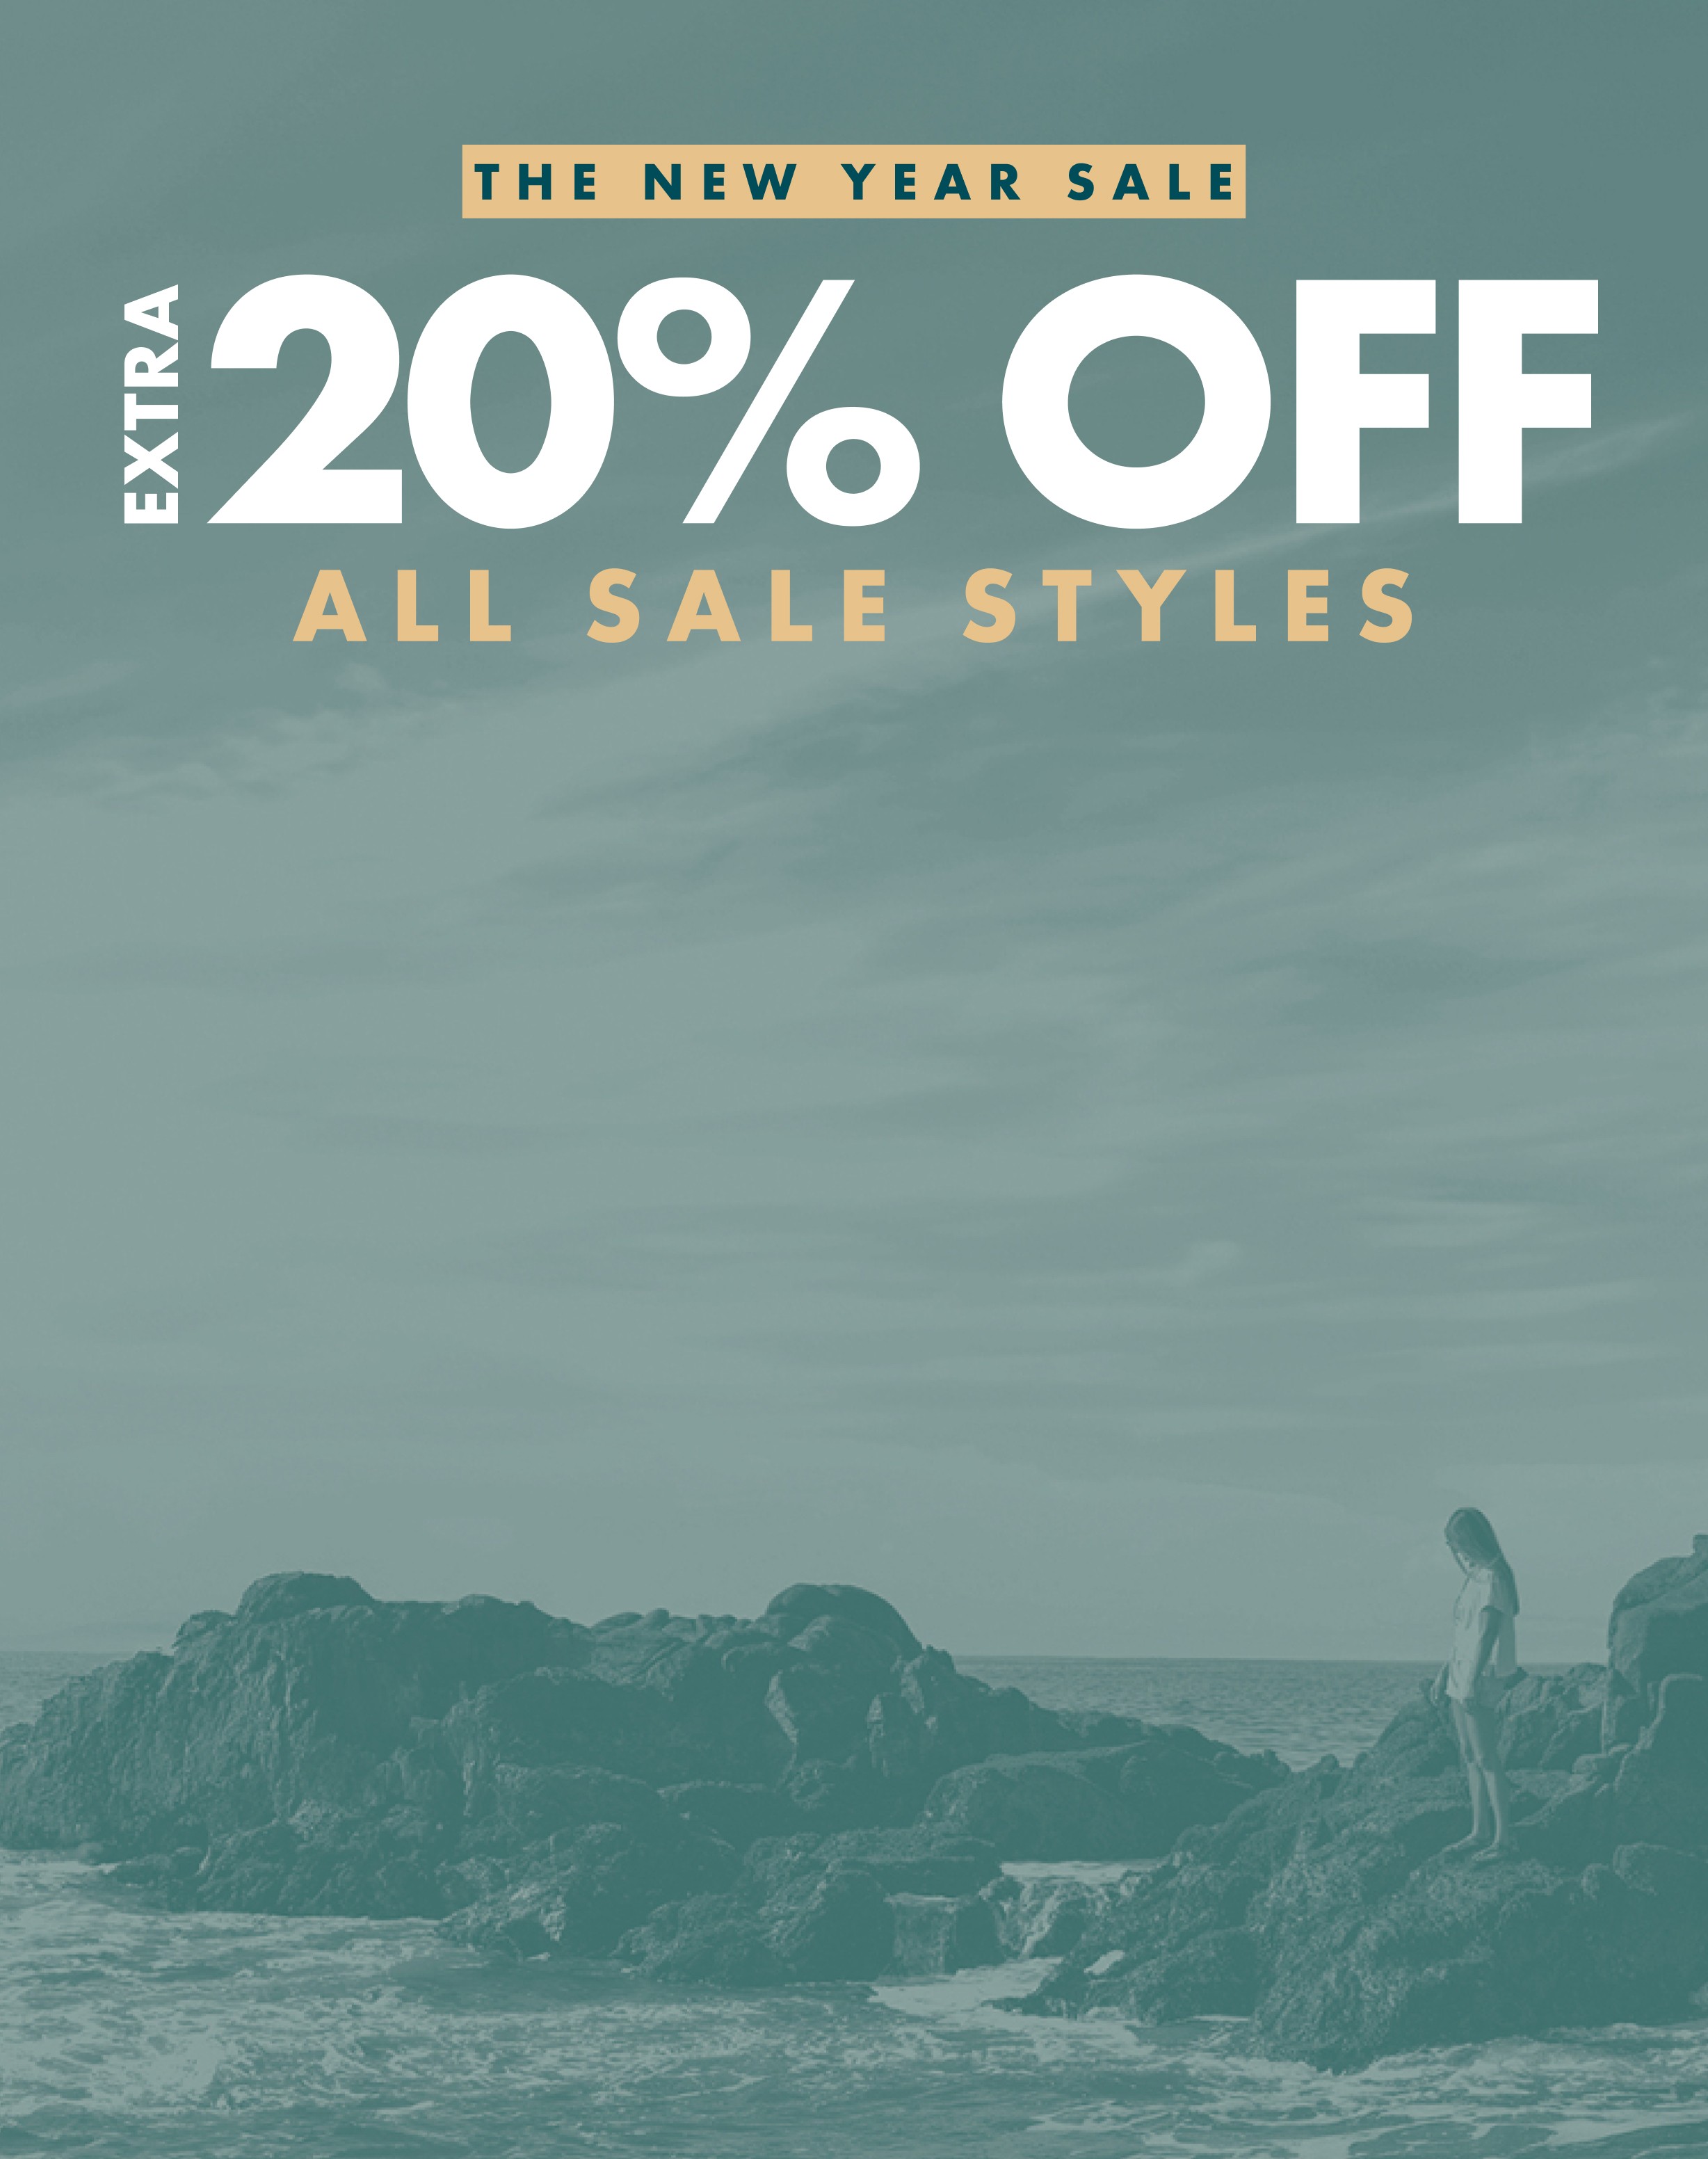 The New Year Sale - Extra 20% Off All Sale Styles